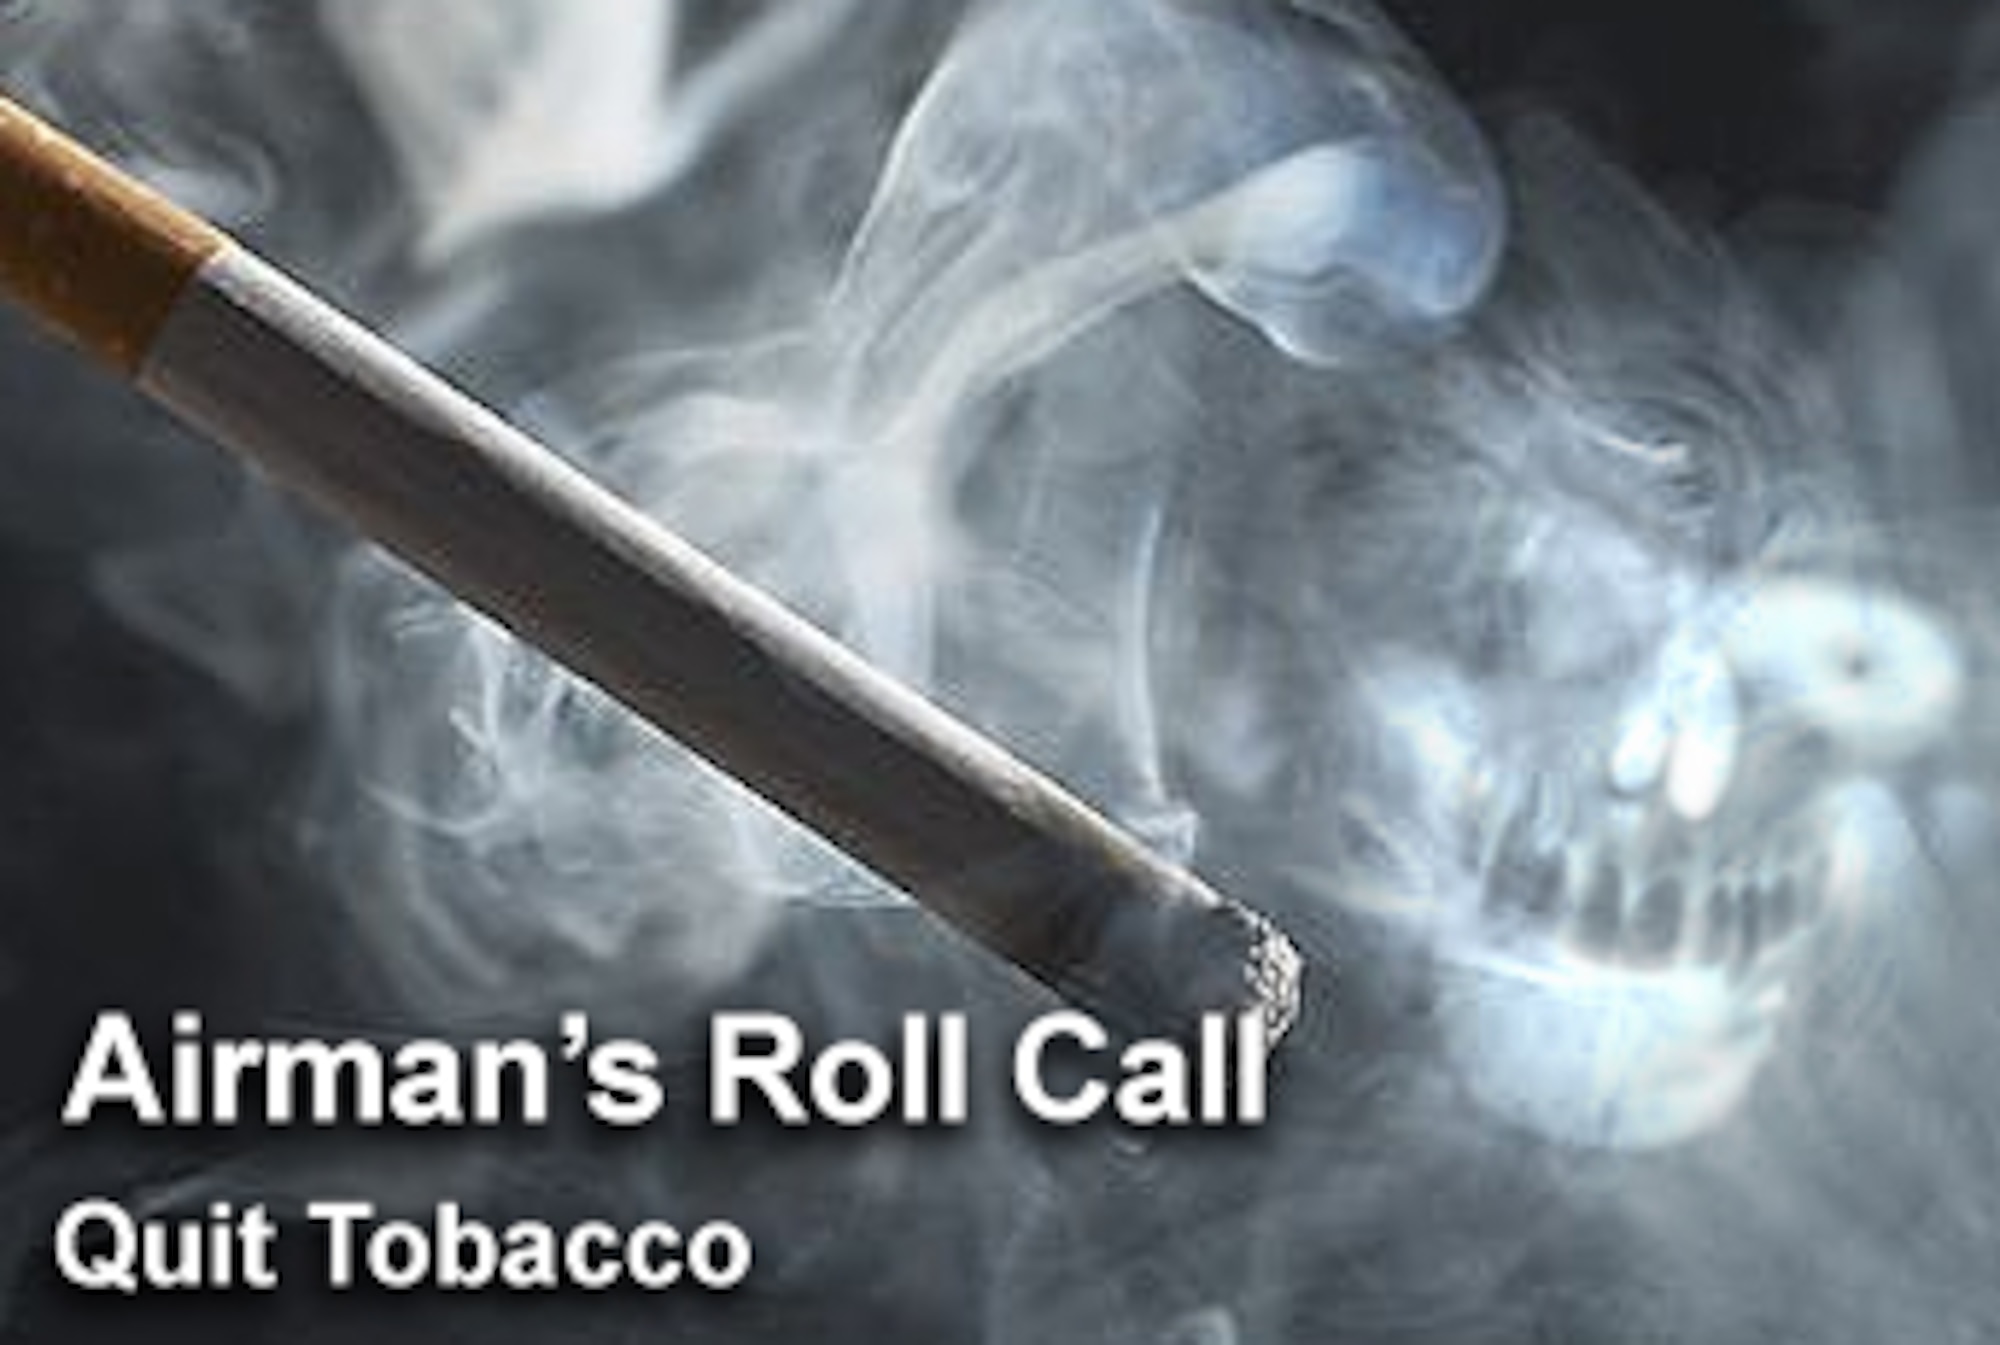 This week's Airman's Roll Call offers Airmen who smoke a new resource to help them quit tobacco.  (U.S. Air Force photo illustration/Luke Borland)